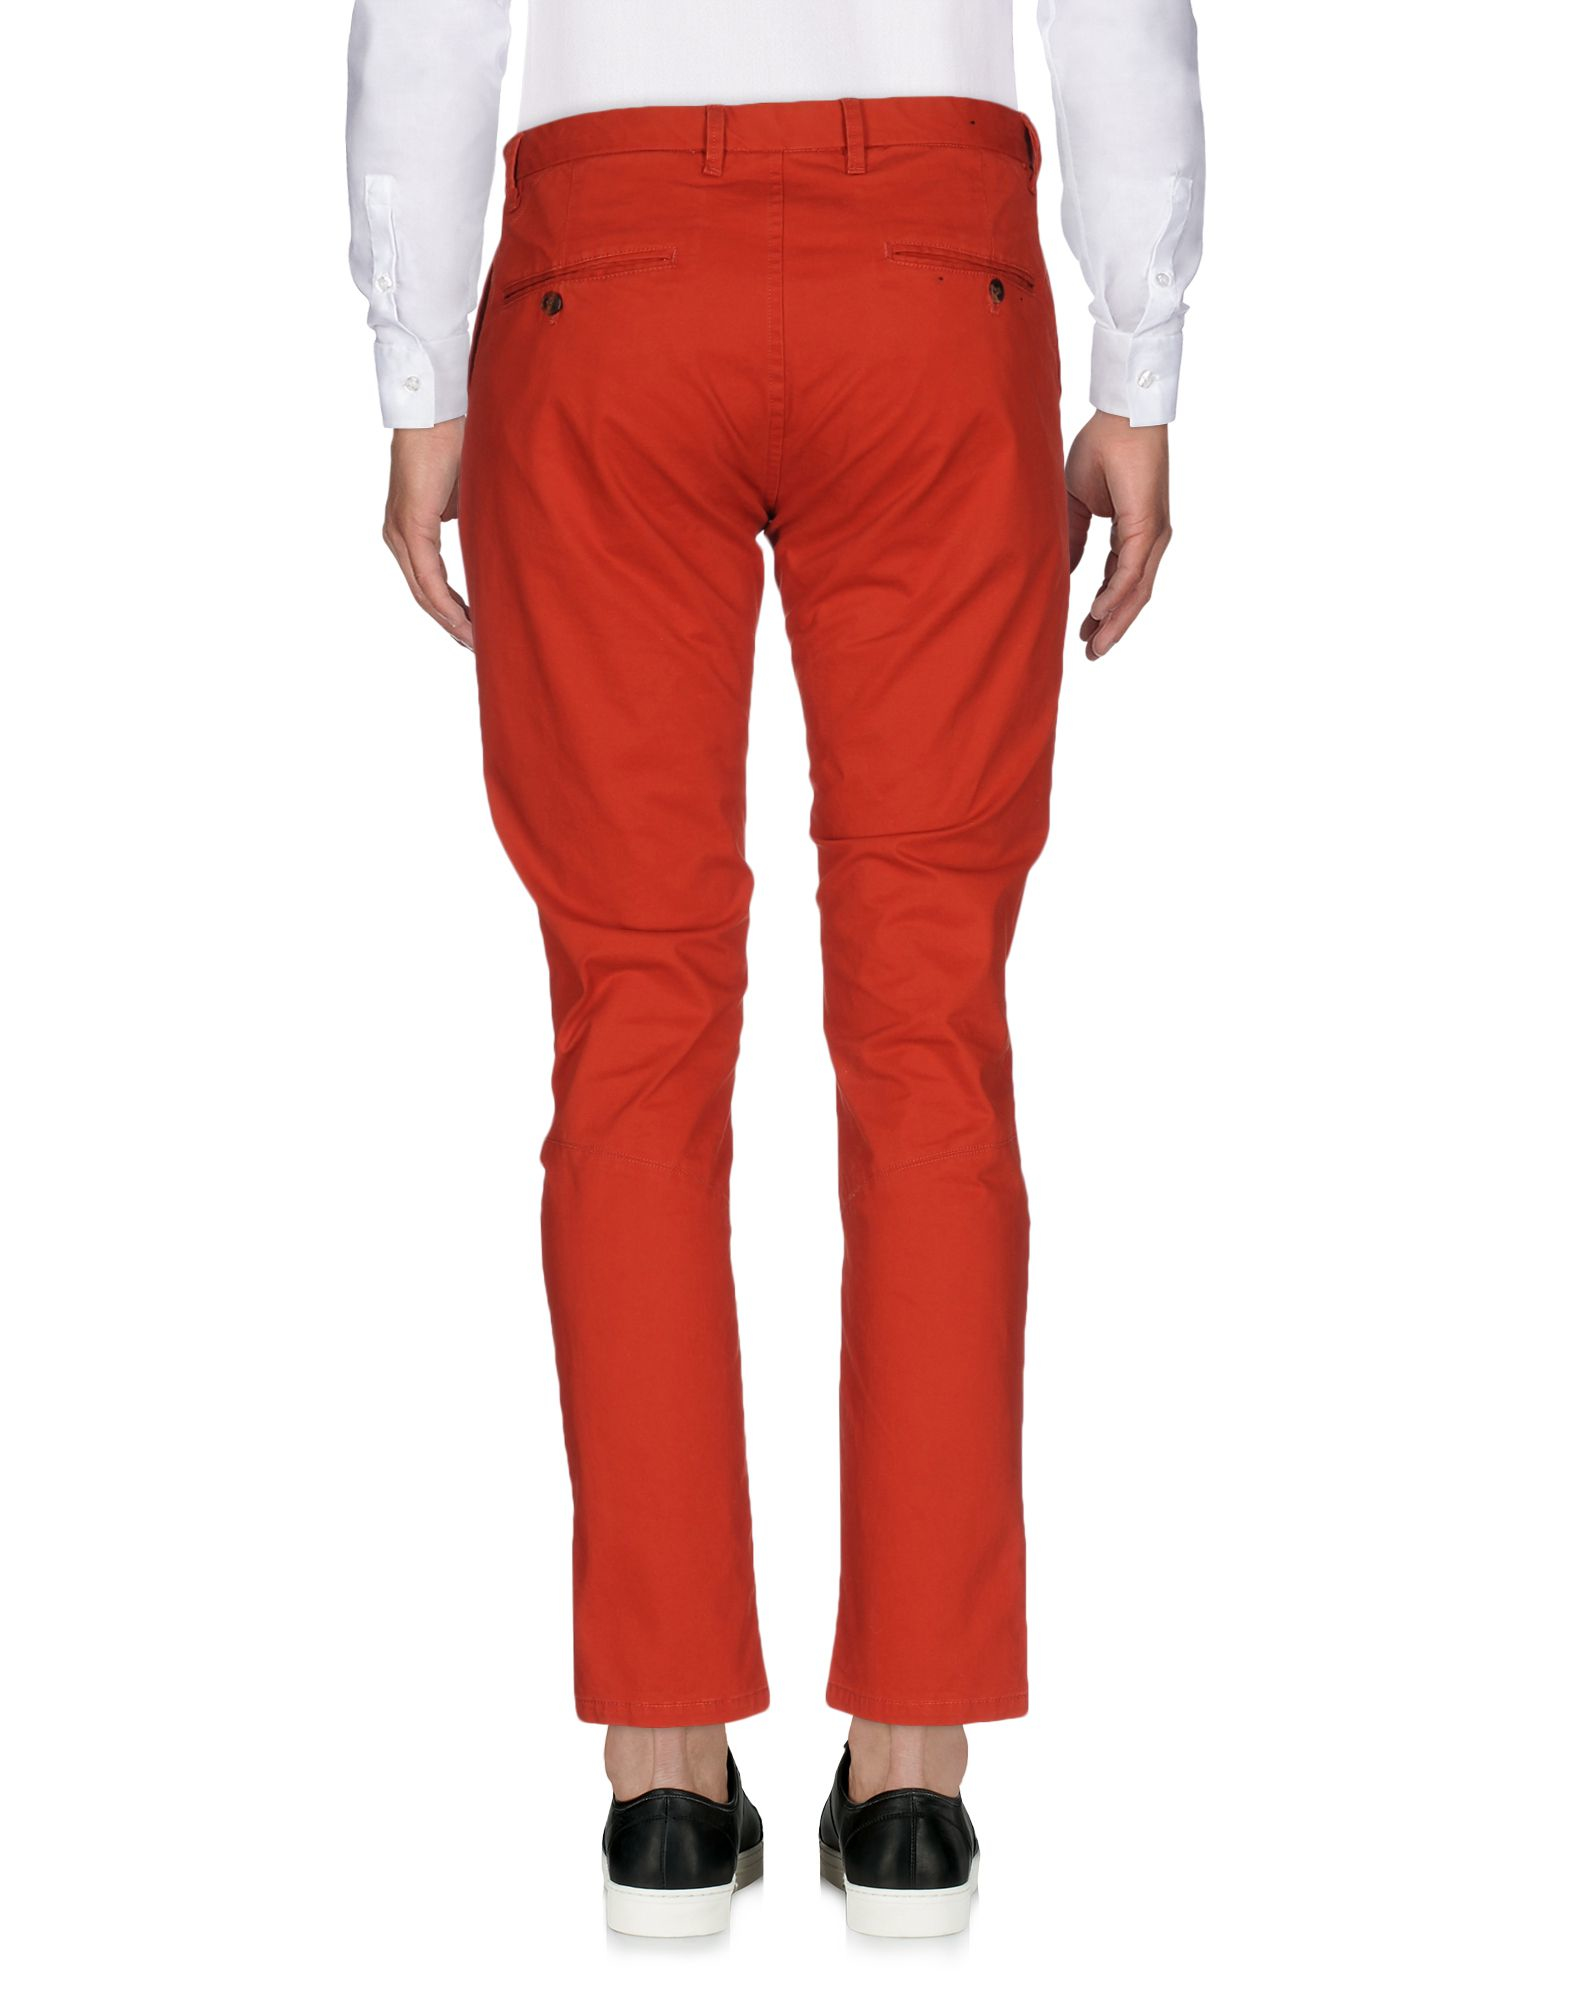 Scotch & Soda Cotton Casual Pants in Rust (Red) for Men - Lyst